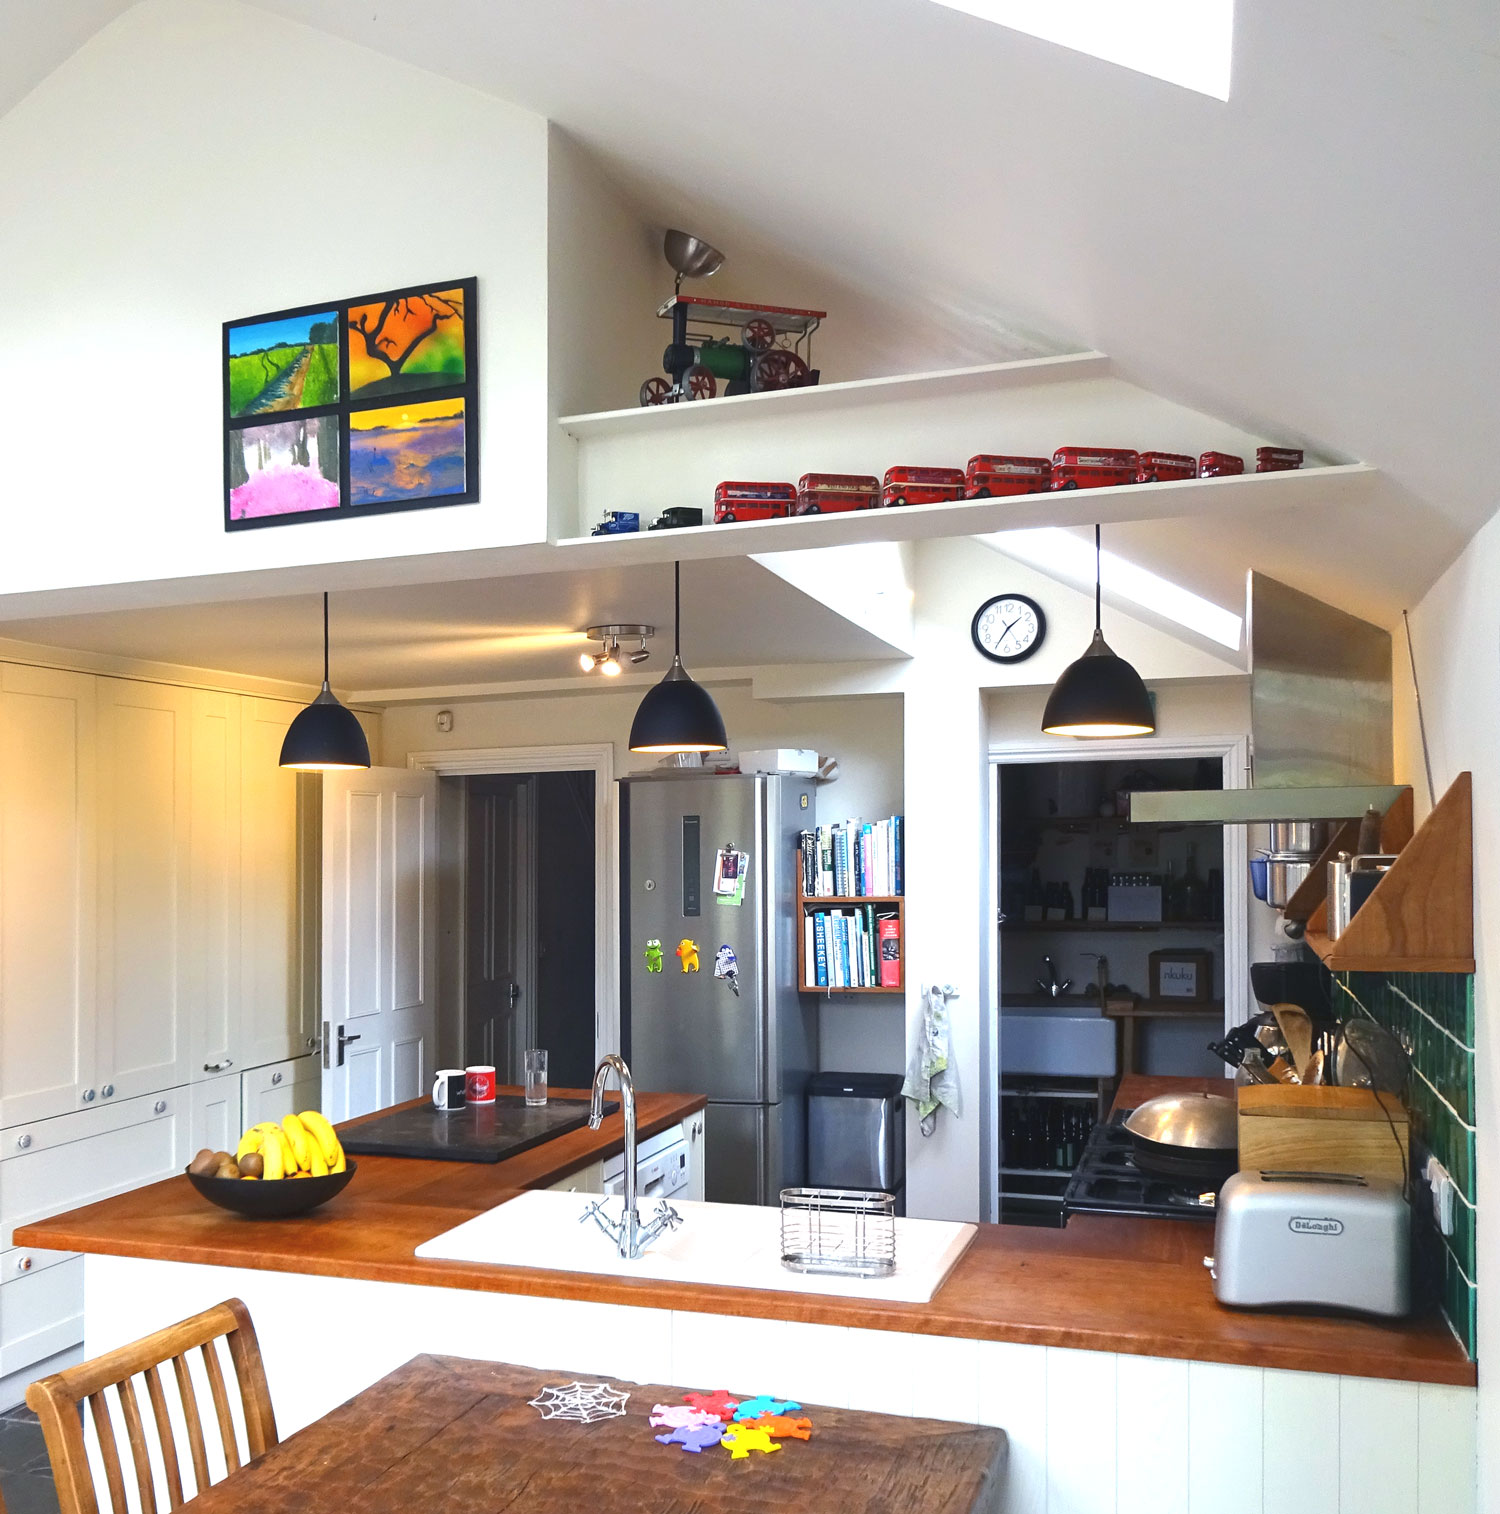 interior view of kitchen peninsula with sink and three pendant ligths above, exposed painted steel beam above 